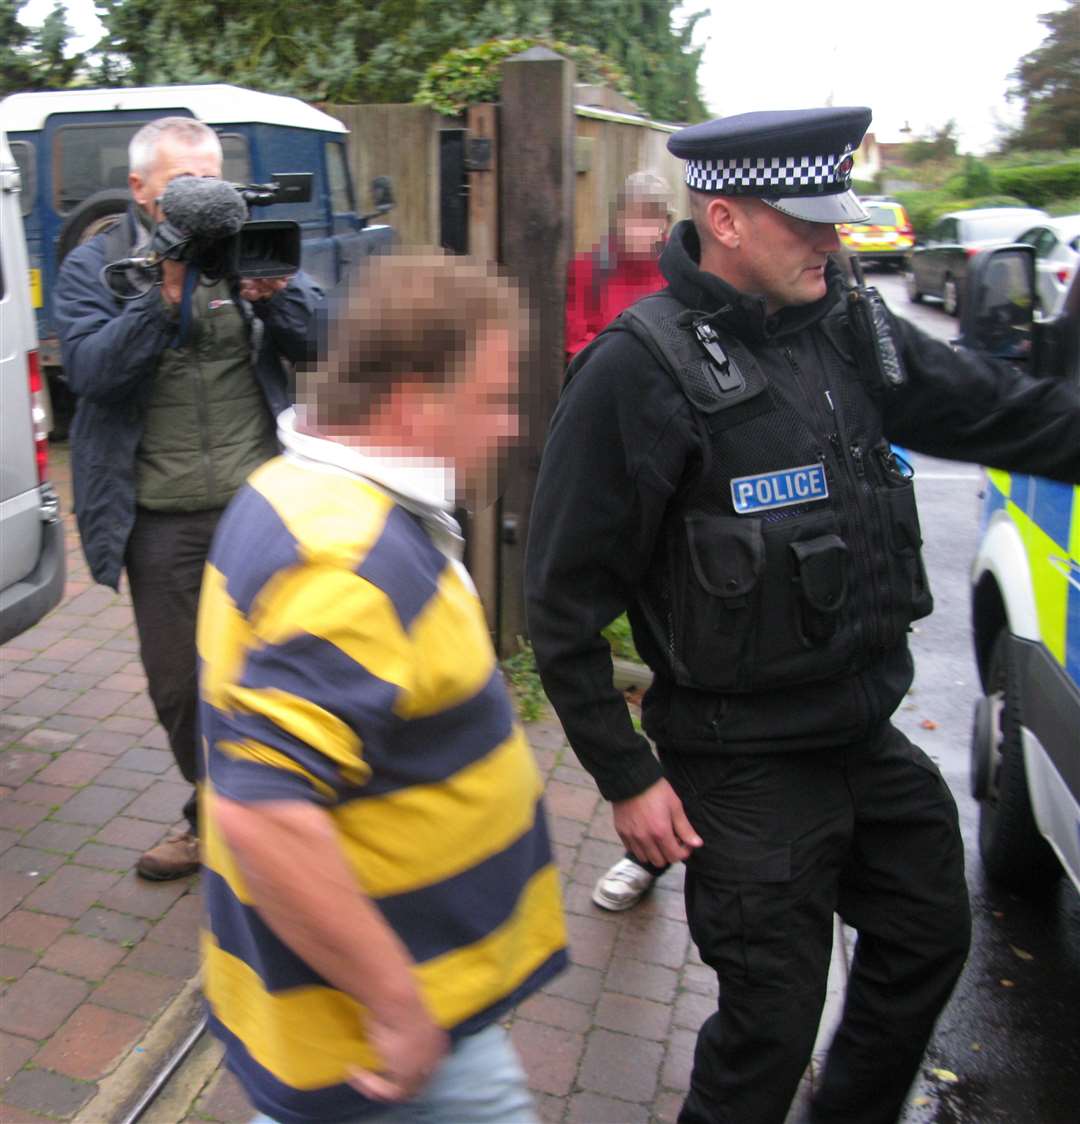 Darrell Houghton being arrested by police during the raid in 2012. No criminal charges were brought in England